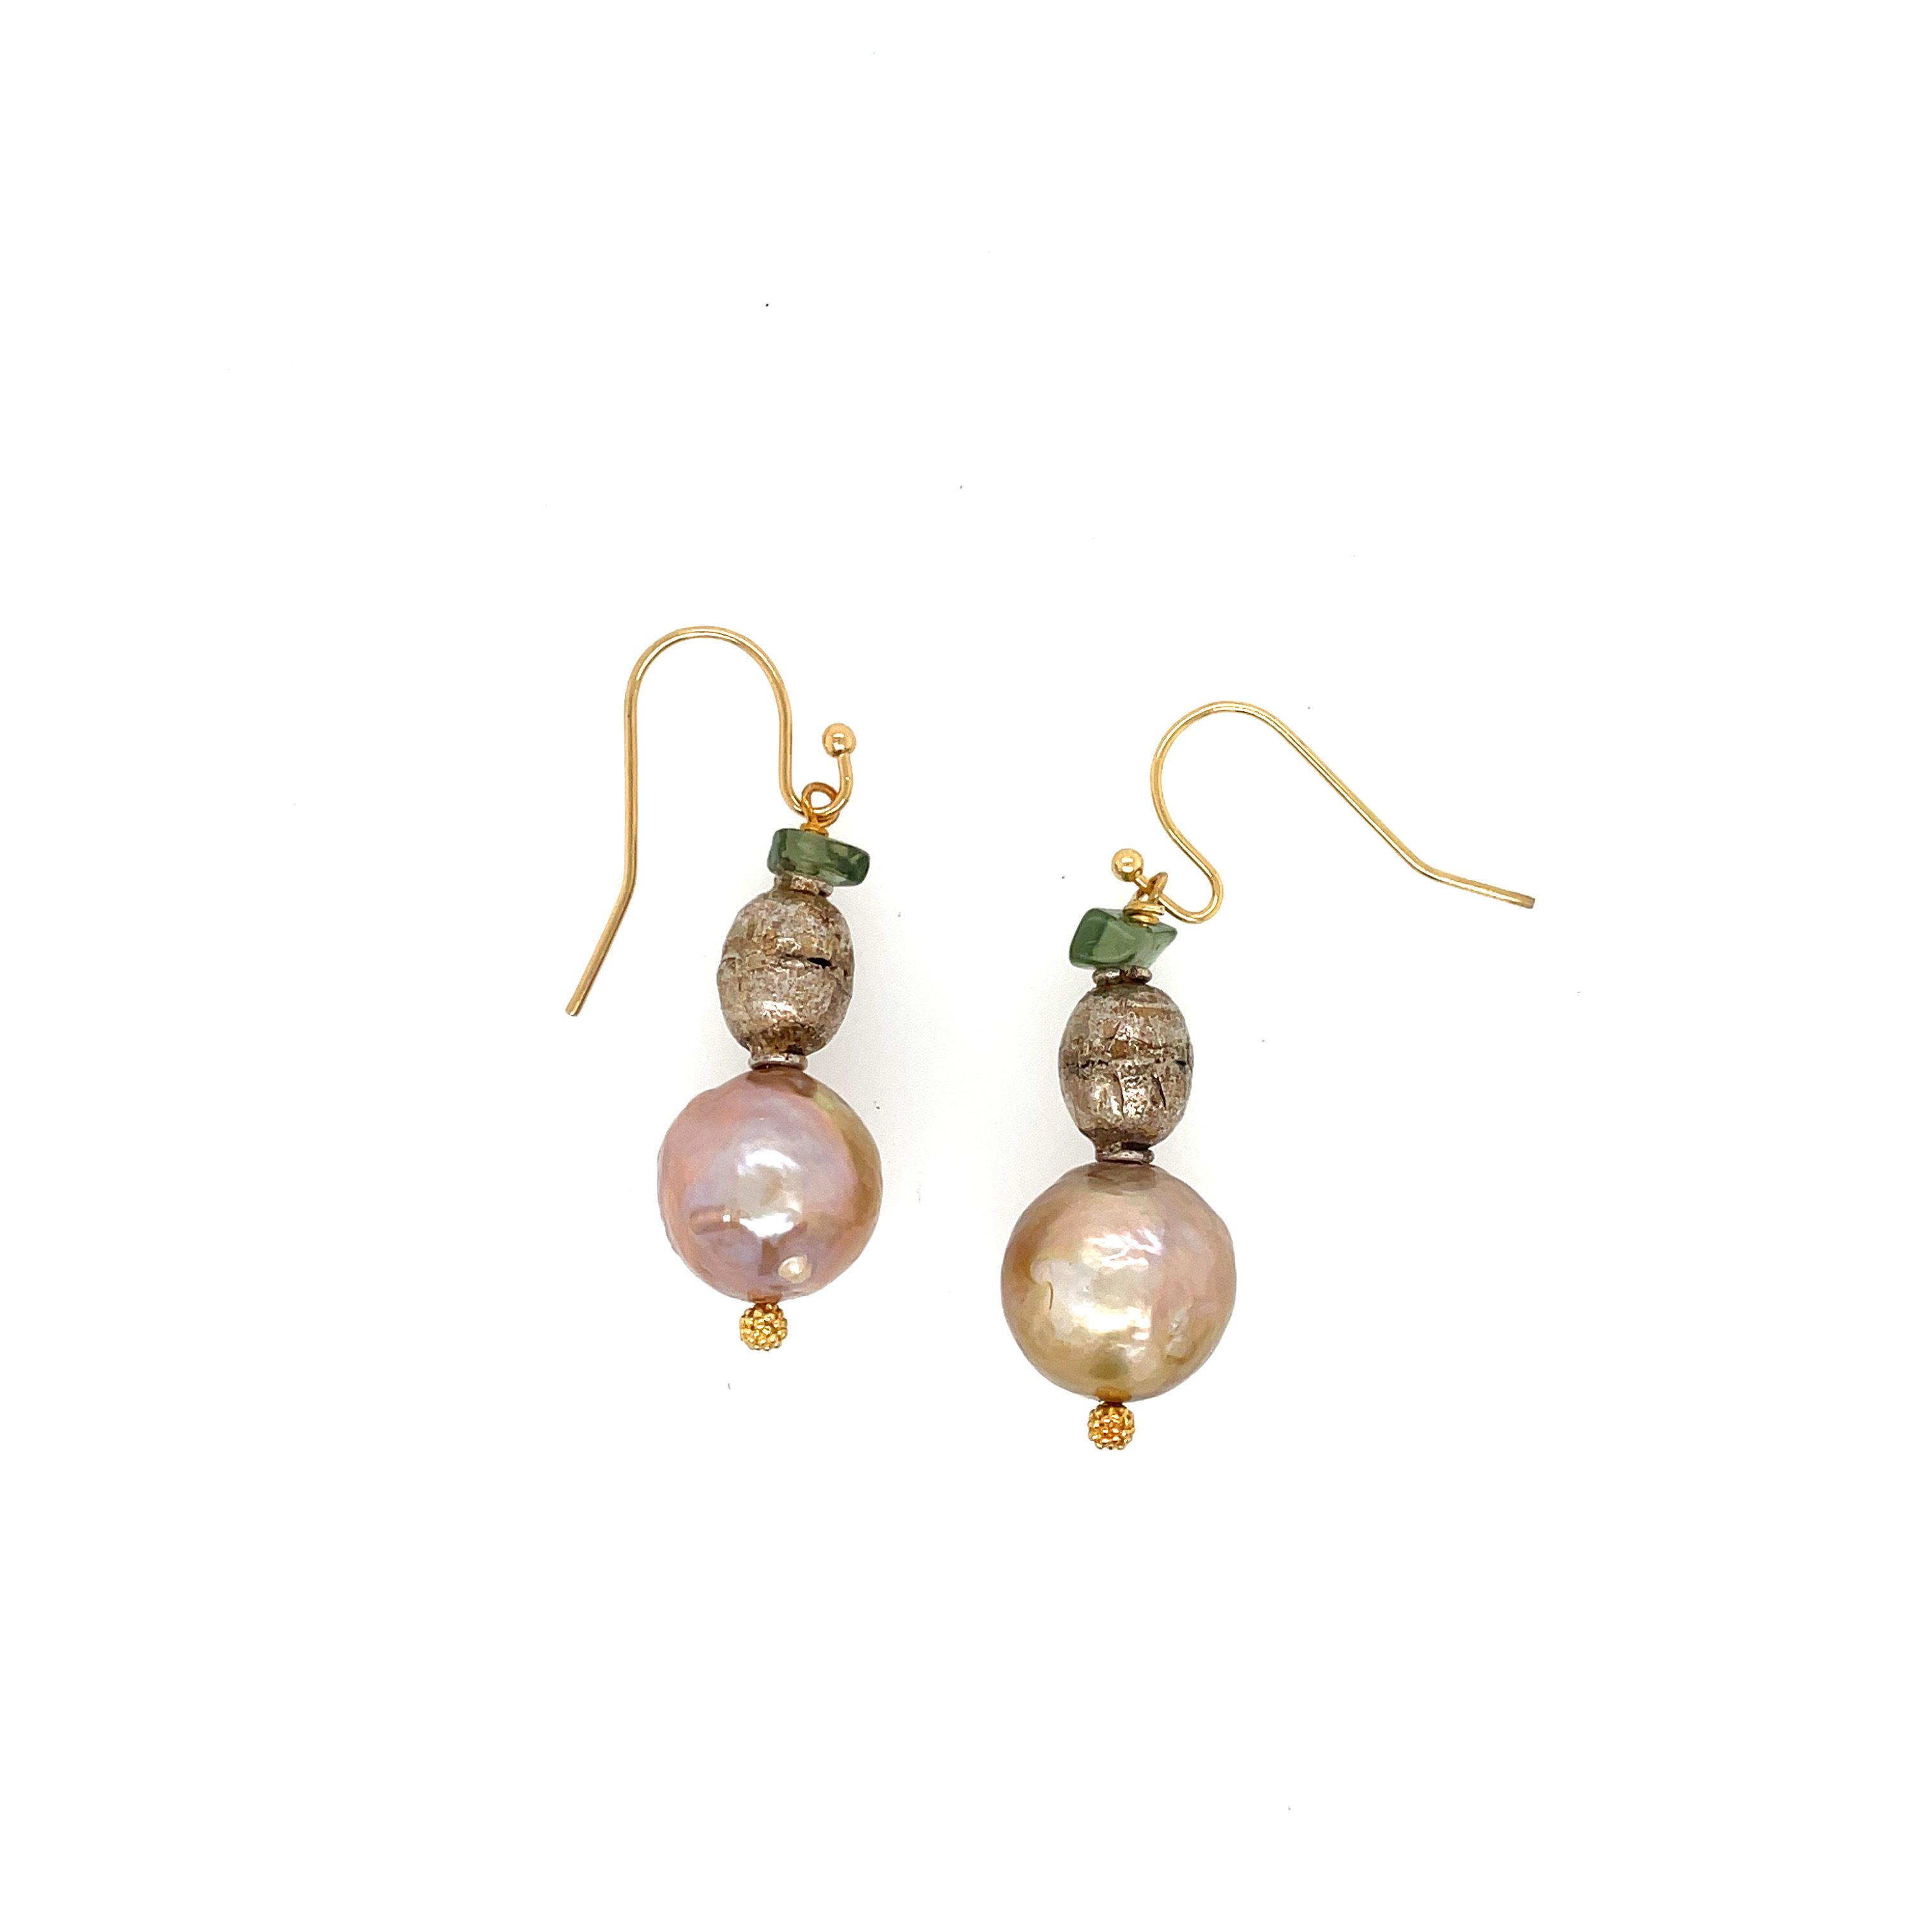 Cotton candy colored natural causes, Mika dangles, and gold filled hooks